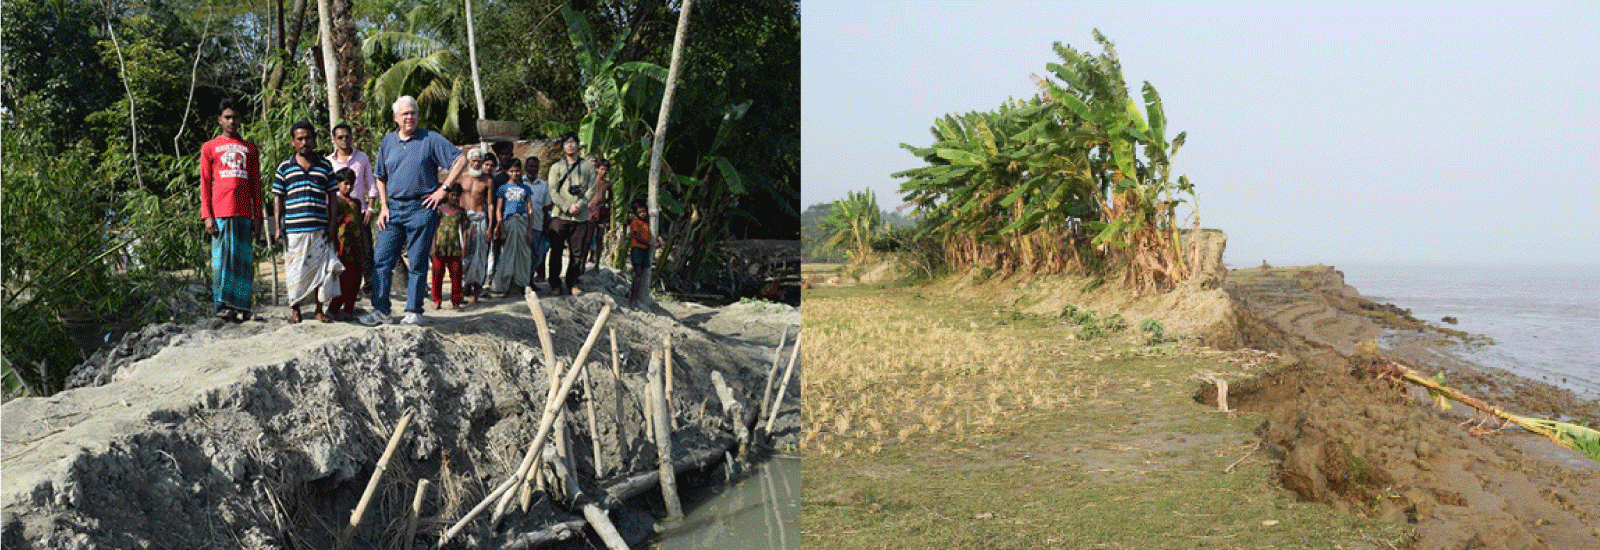 Left: Craig Jenkins standing alongside a temporary repair in an embankment that protects 5,000 people's homes. Right: An eroded rice field alongside a river in Bangladesh. 